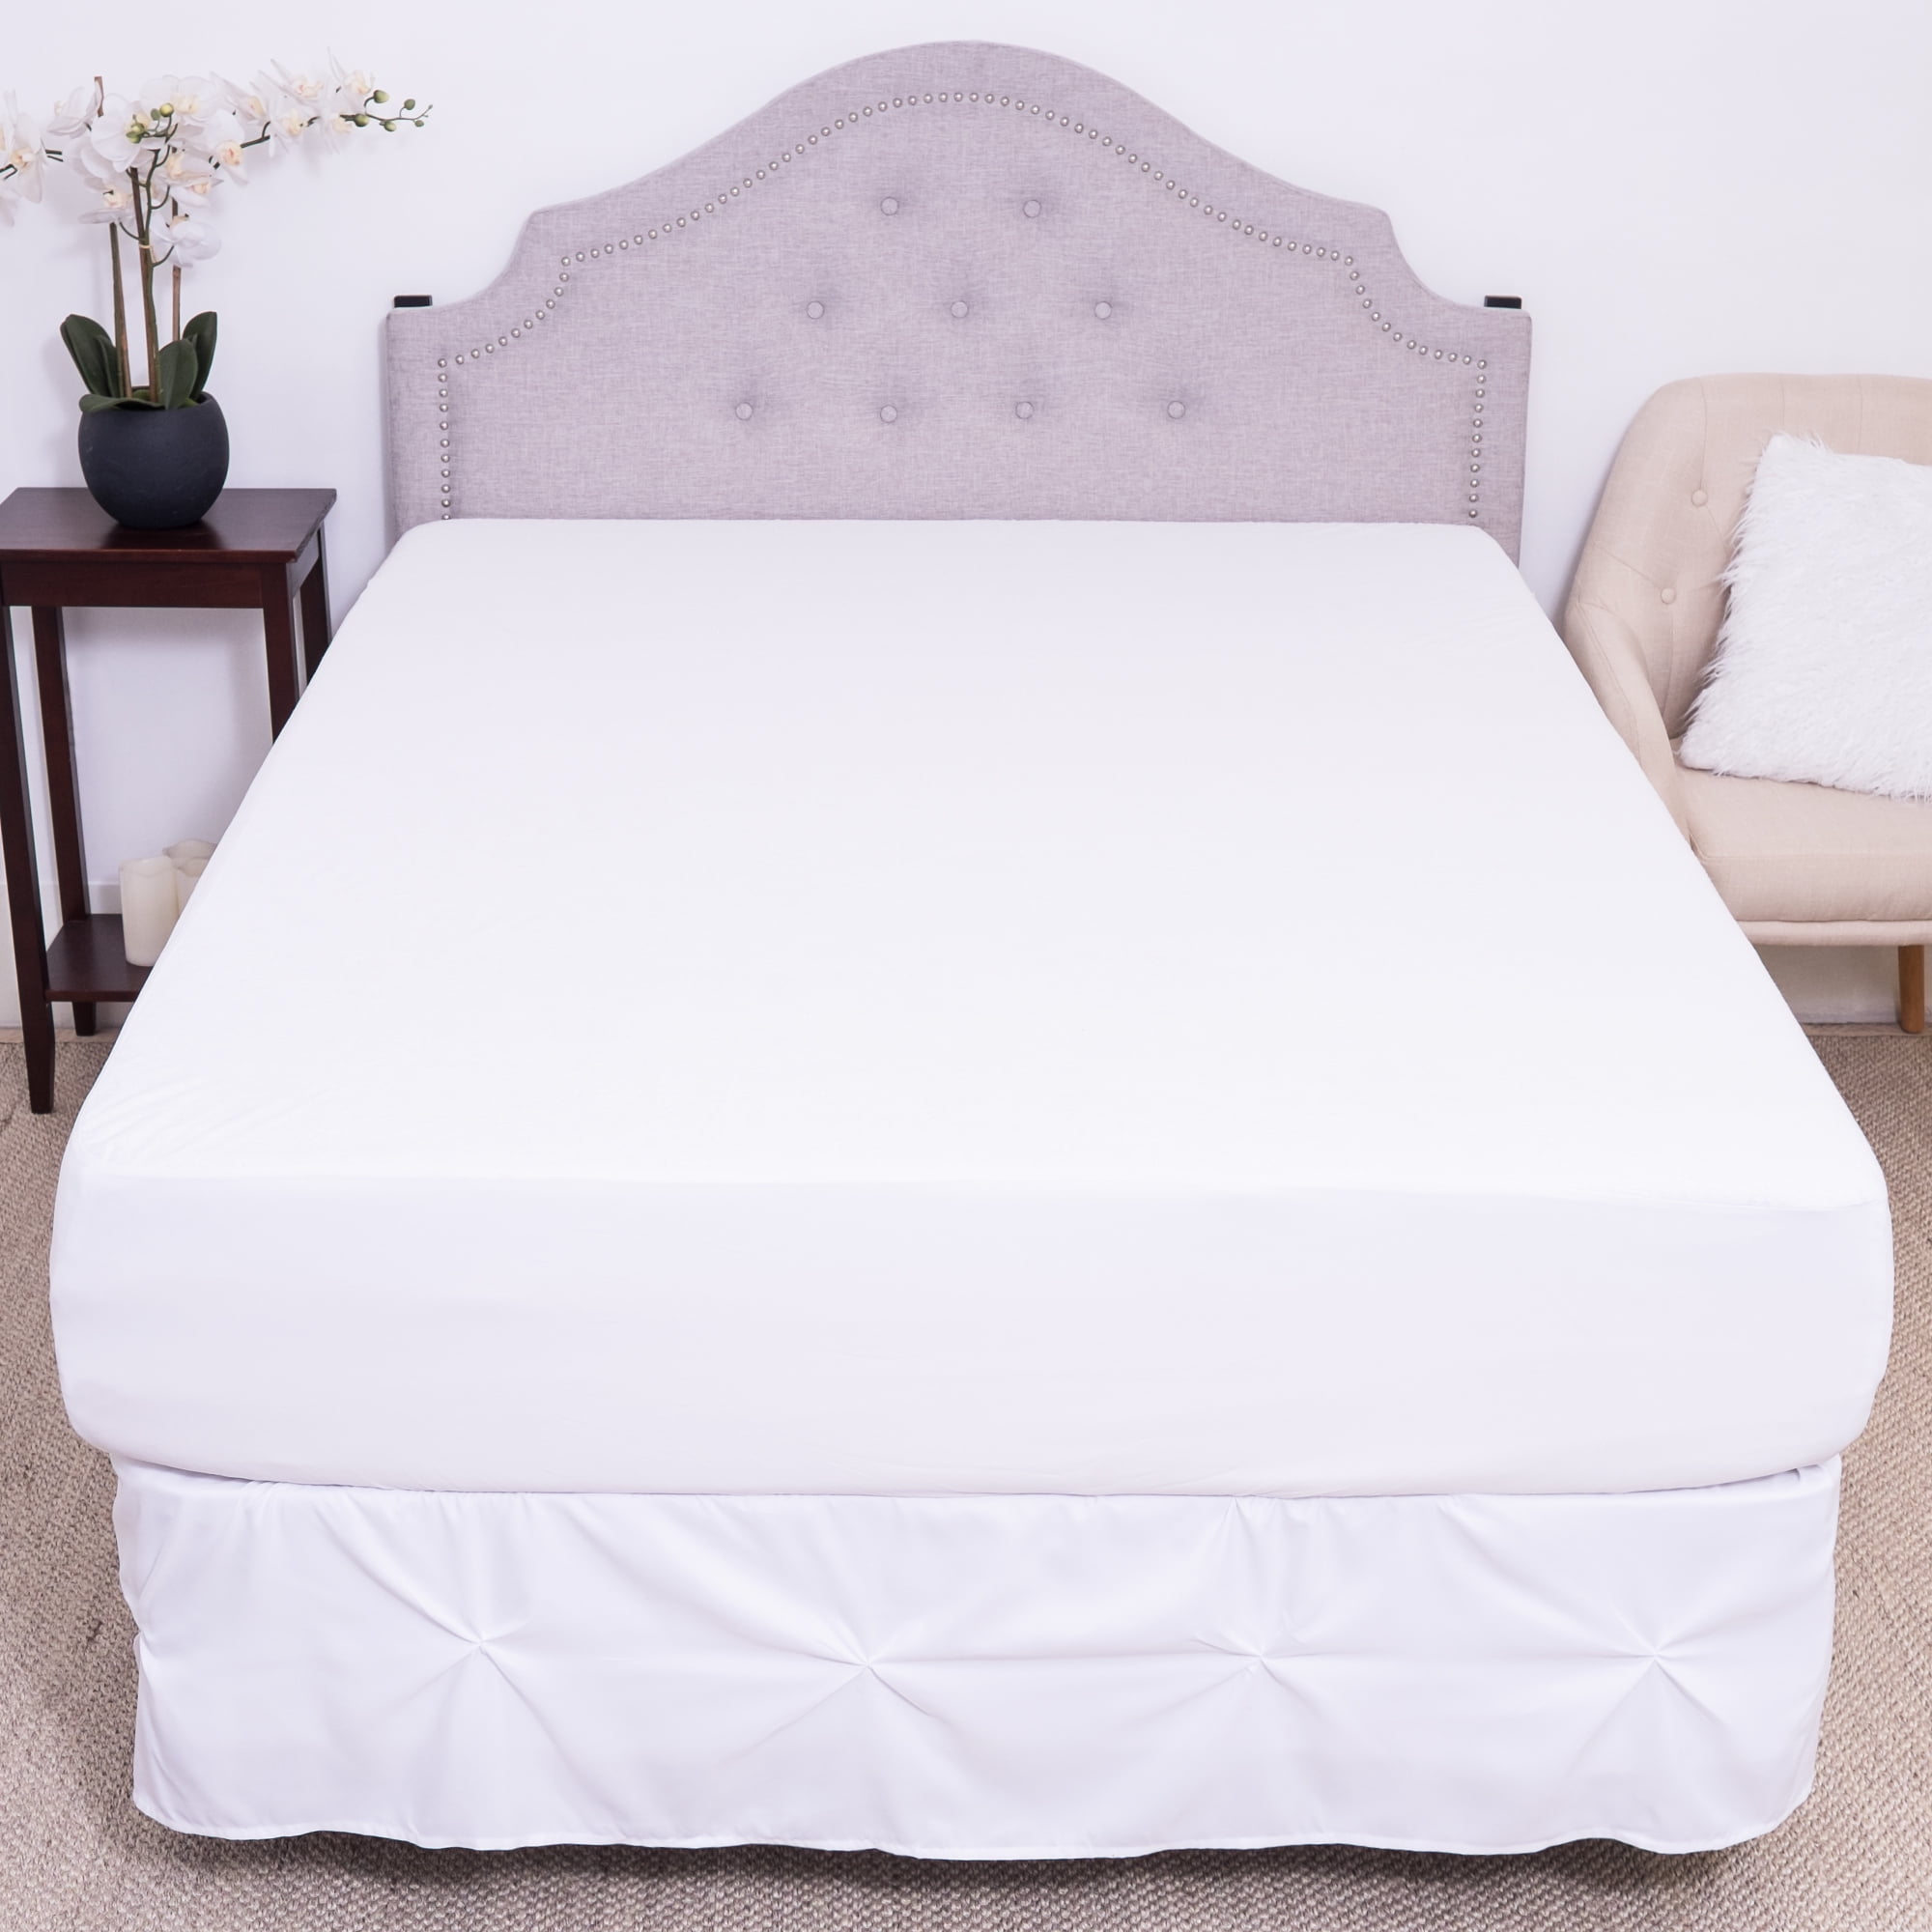 KING SIZE 100% Waterproof Terry Mattress Protector Fitted Bed Cover Sheet 